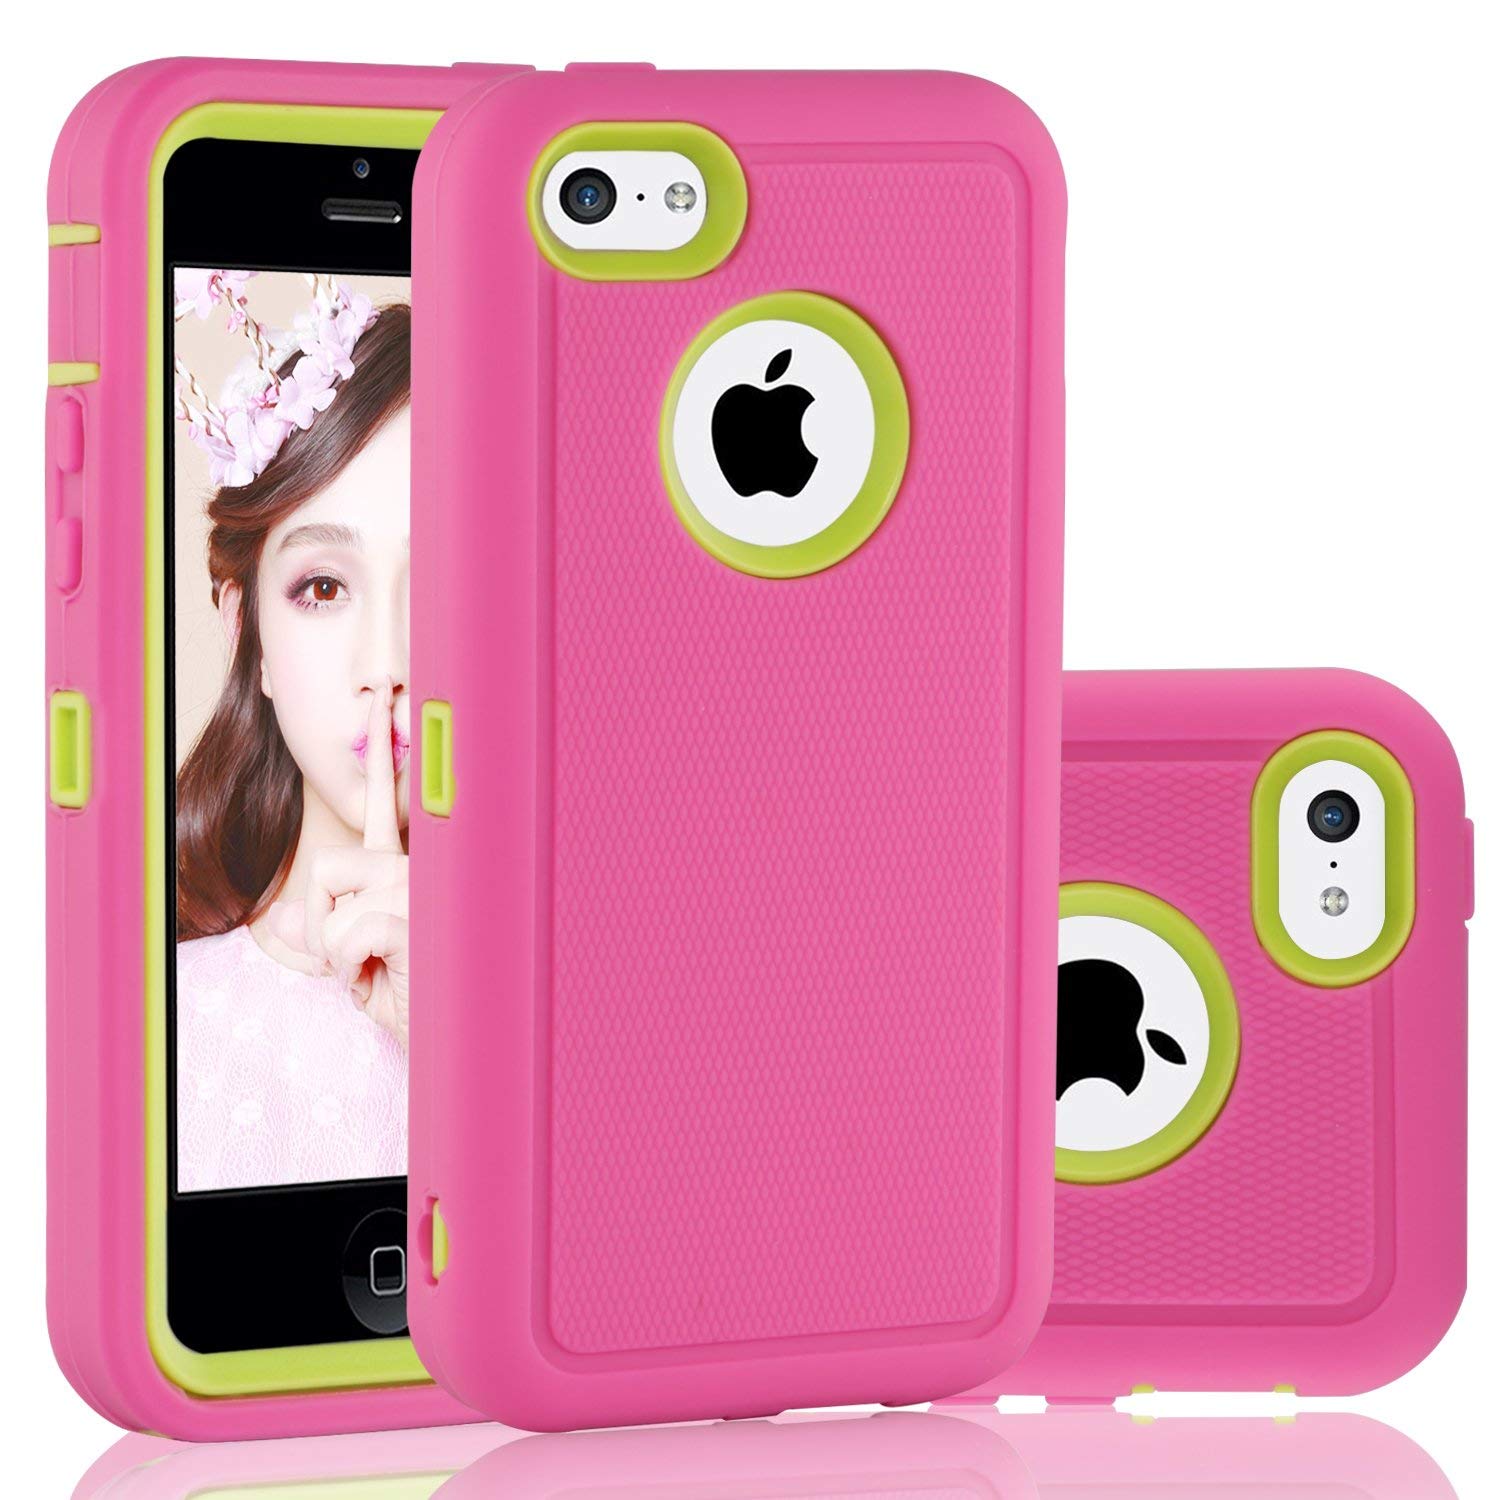 iPhone 5C Case, FOGEEK Dual Layer Anti Slip 360 Full Body Cover Case PC and TPU Shockproof Protective Compatible for Apple iPhone 5C ONLY(Pink/Green)